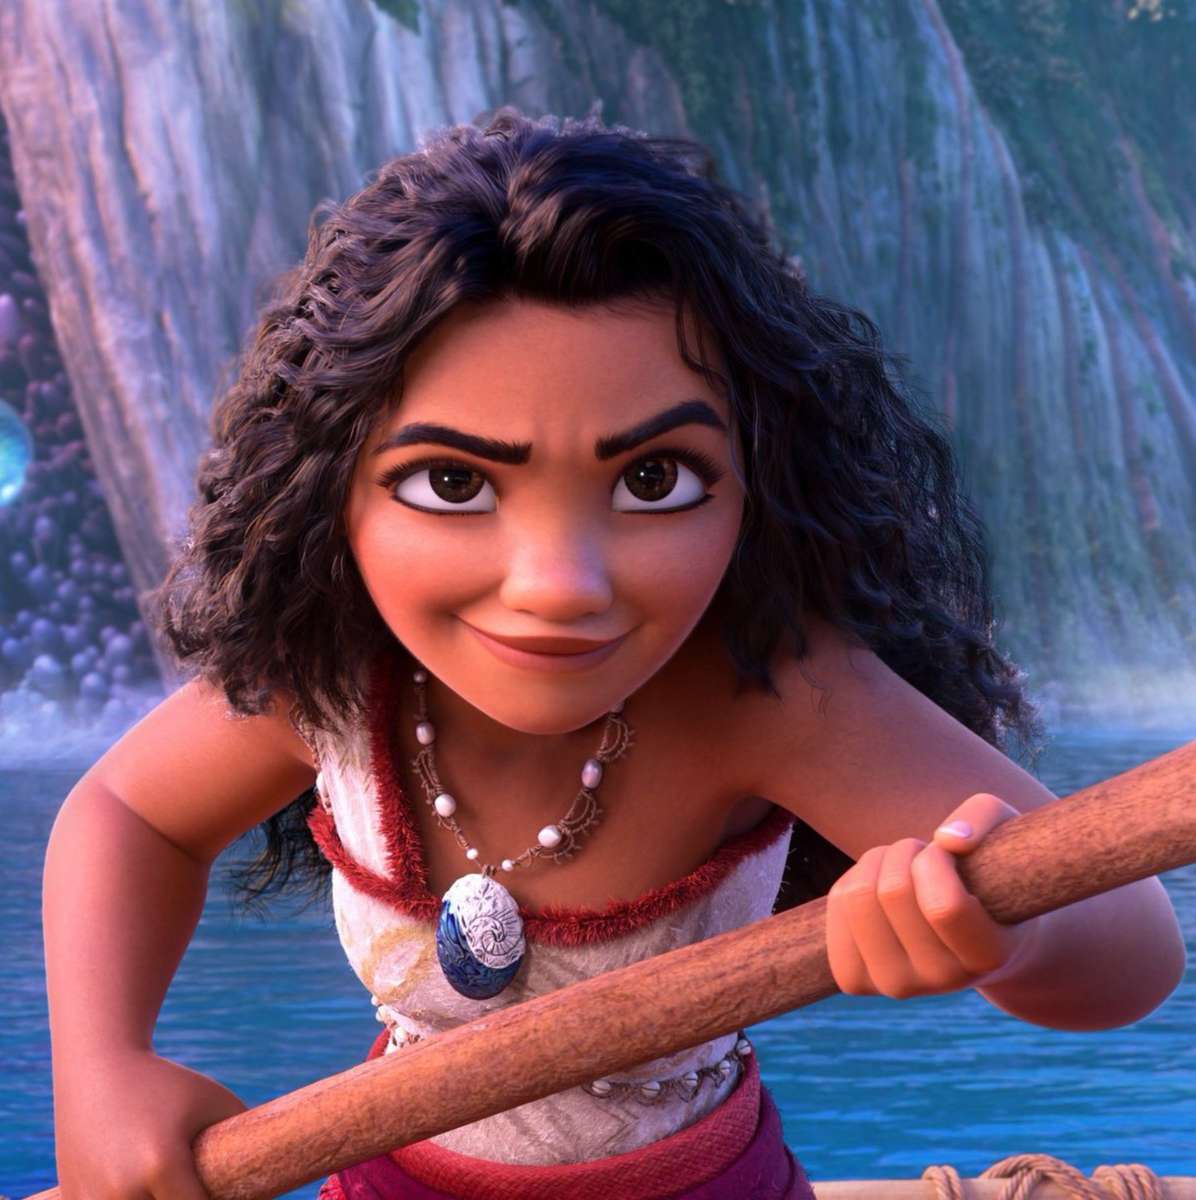 New look at Moana❤️❤️❤️❤️❤️ online puzzle